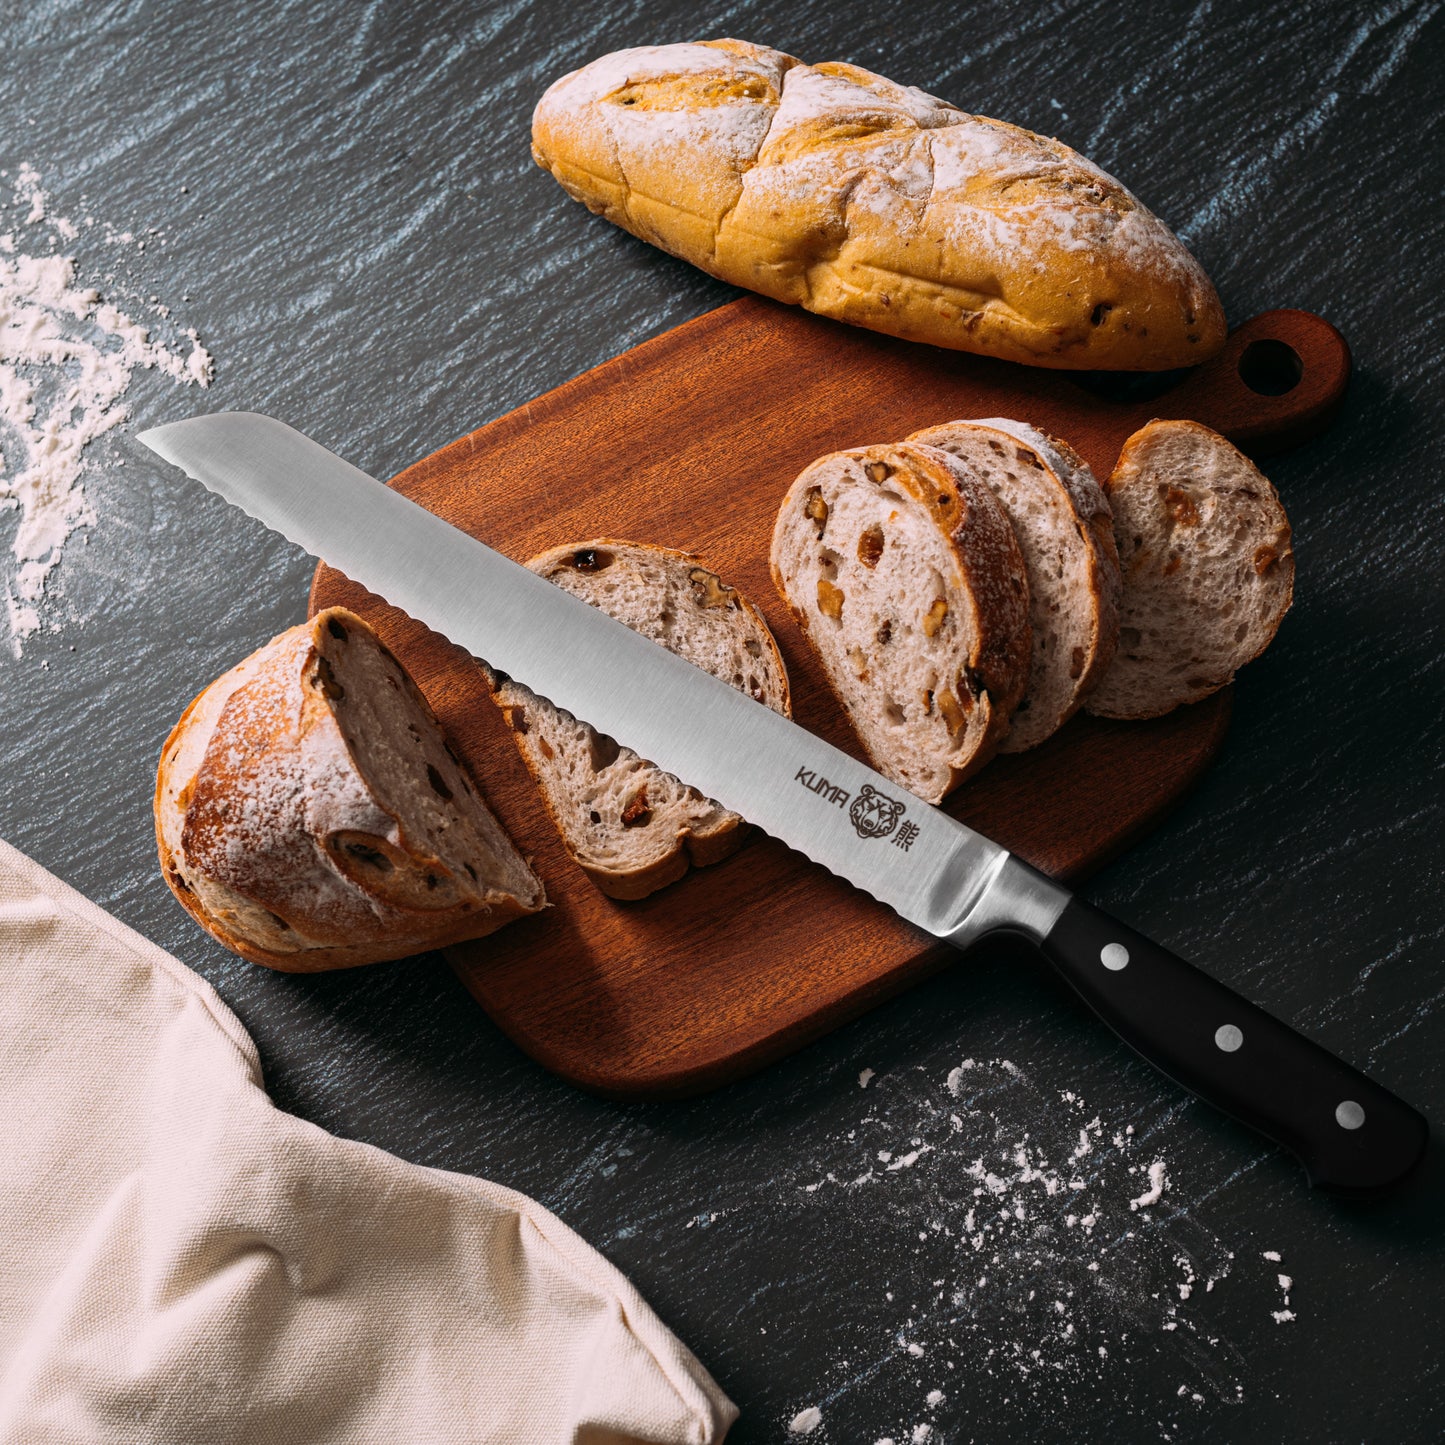 KUMA Fine Serrated Bread Knife Classic - 10" Flexible Blade For Real Slicing - Cut Without Ruining Loaf